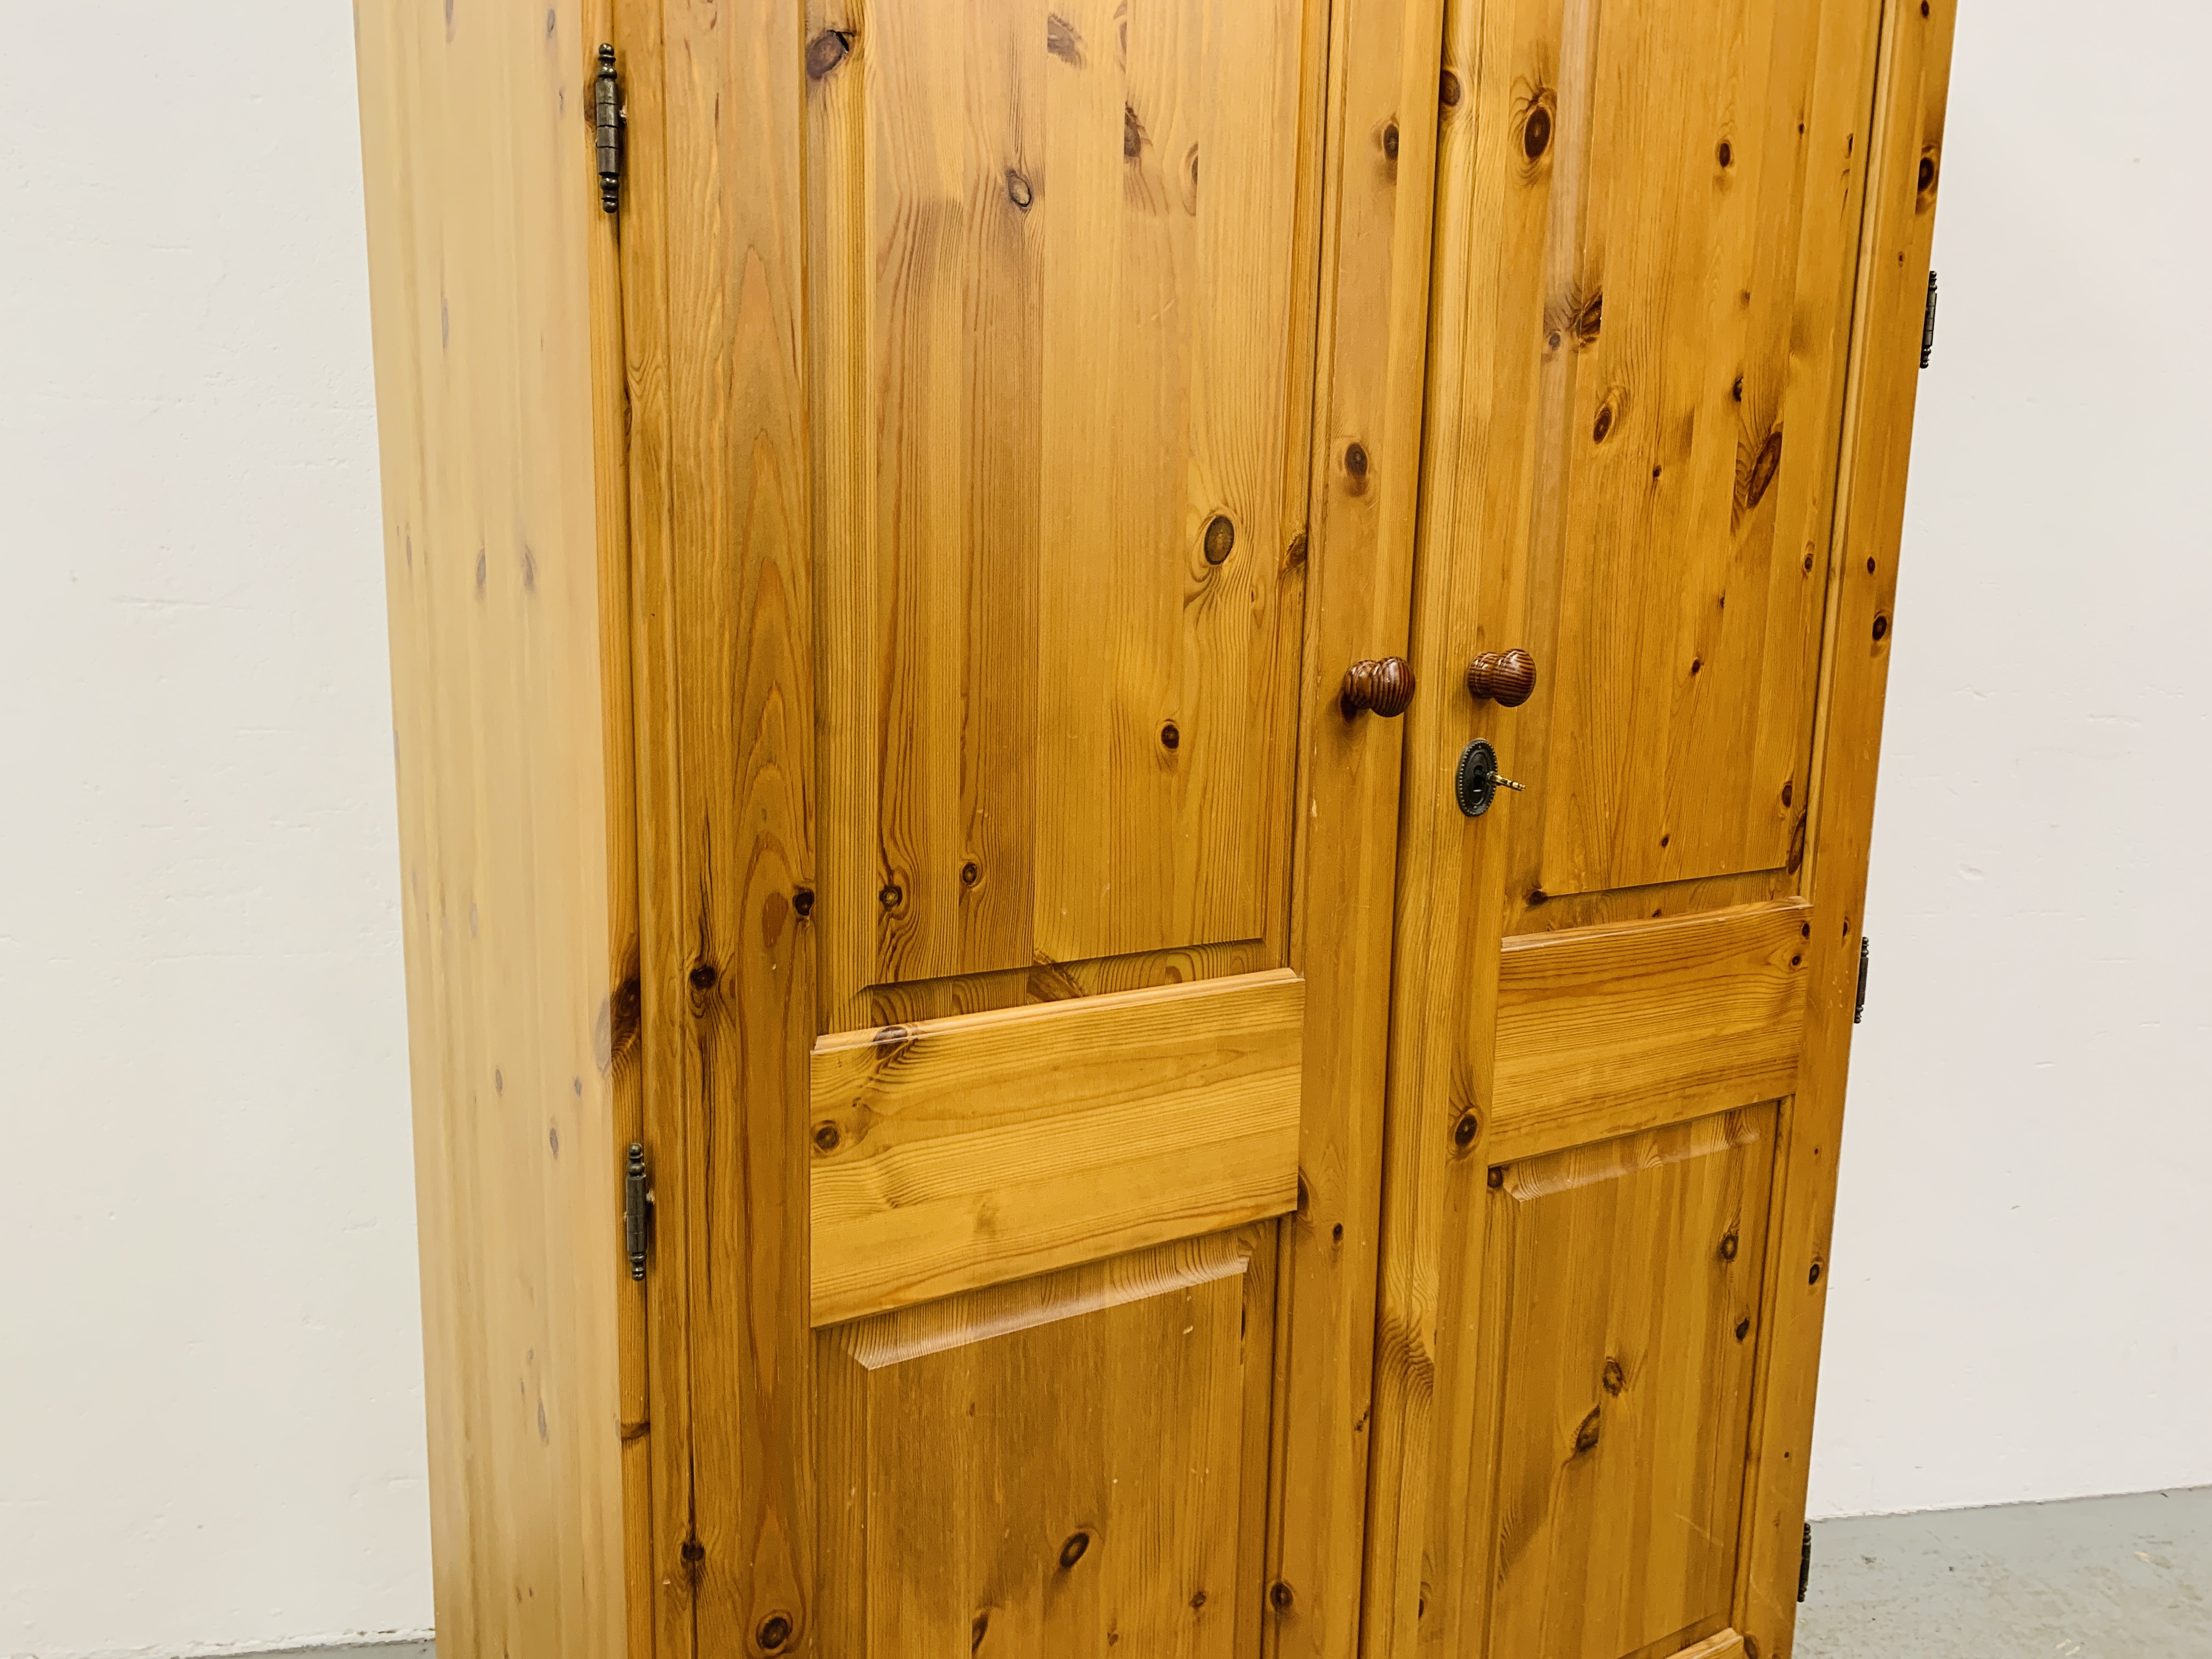 A GOOD QUALITY MODERN HONEY PINE DOUBLE WARDROBE MANUFACTURED BY LINDALE FURNISHINGS W 98CM, D 56CM, - Image 3 of 12